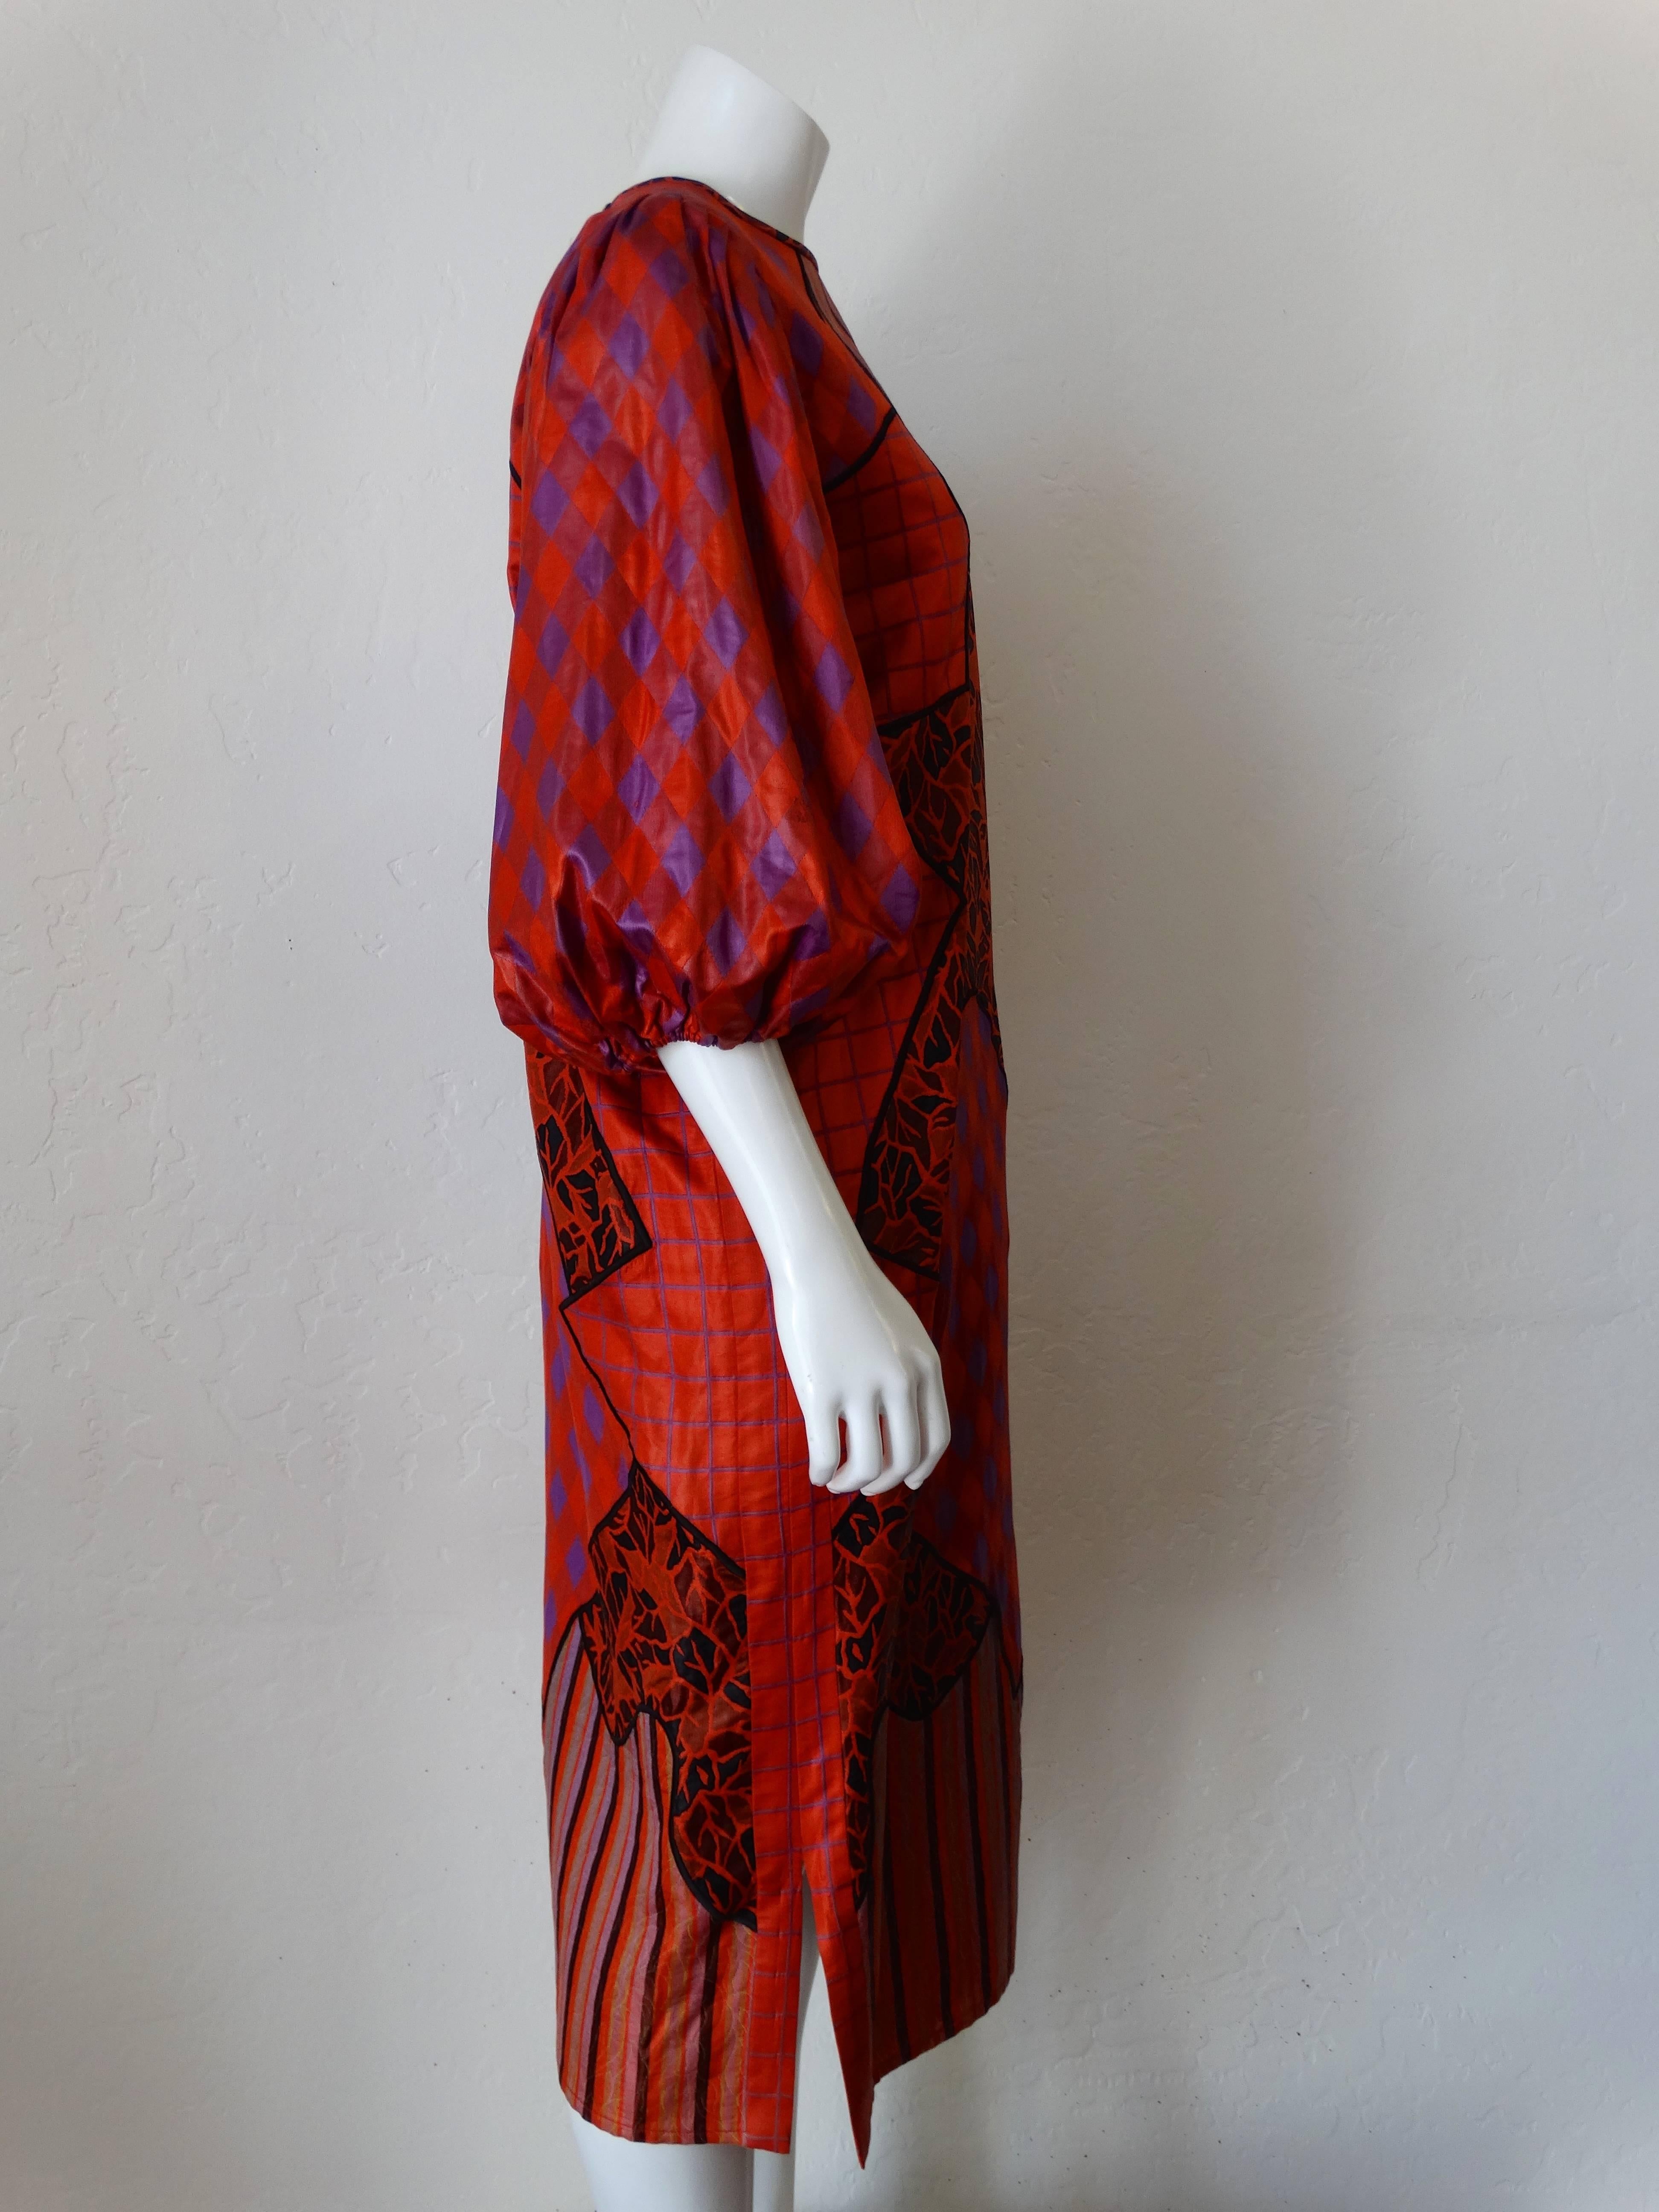 Avant Garde 1980s Diane Freis runway patchwork dress! Billowing balloon sleeves in bold red and violet gingham print. Patches of stripes, leaf-like print and grid. Dress pulls over the head with keyhole closure at the back of the neckline. Made in